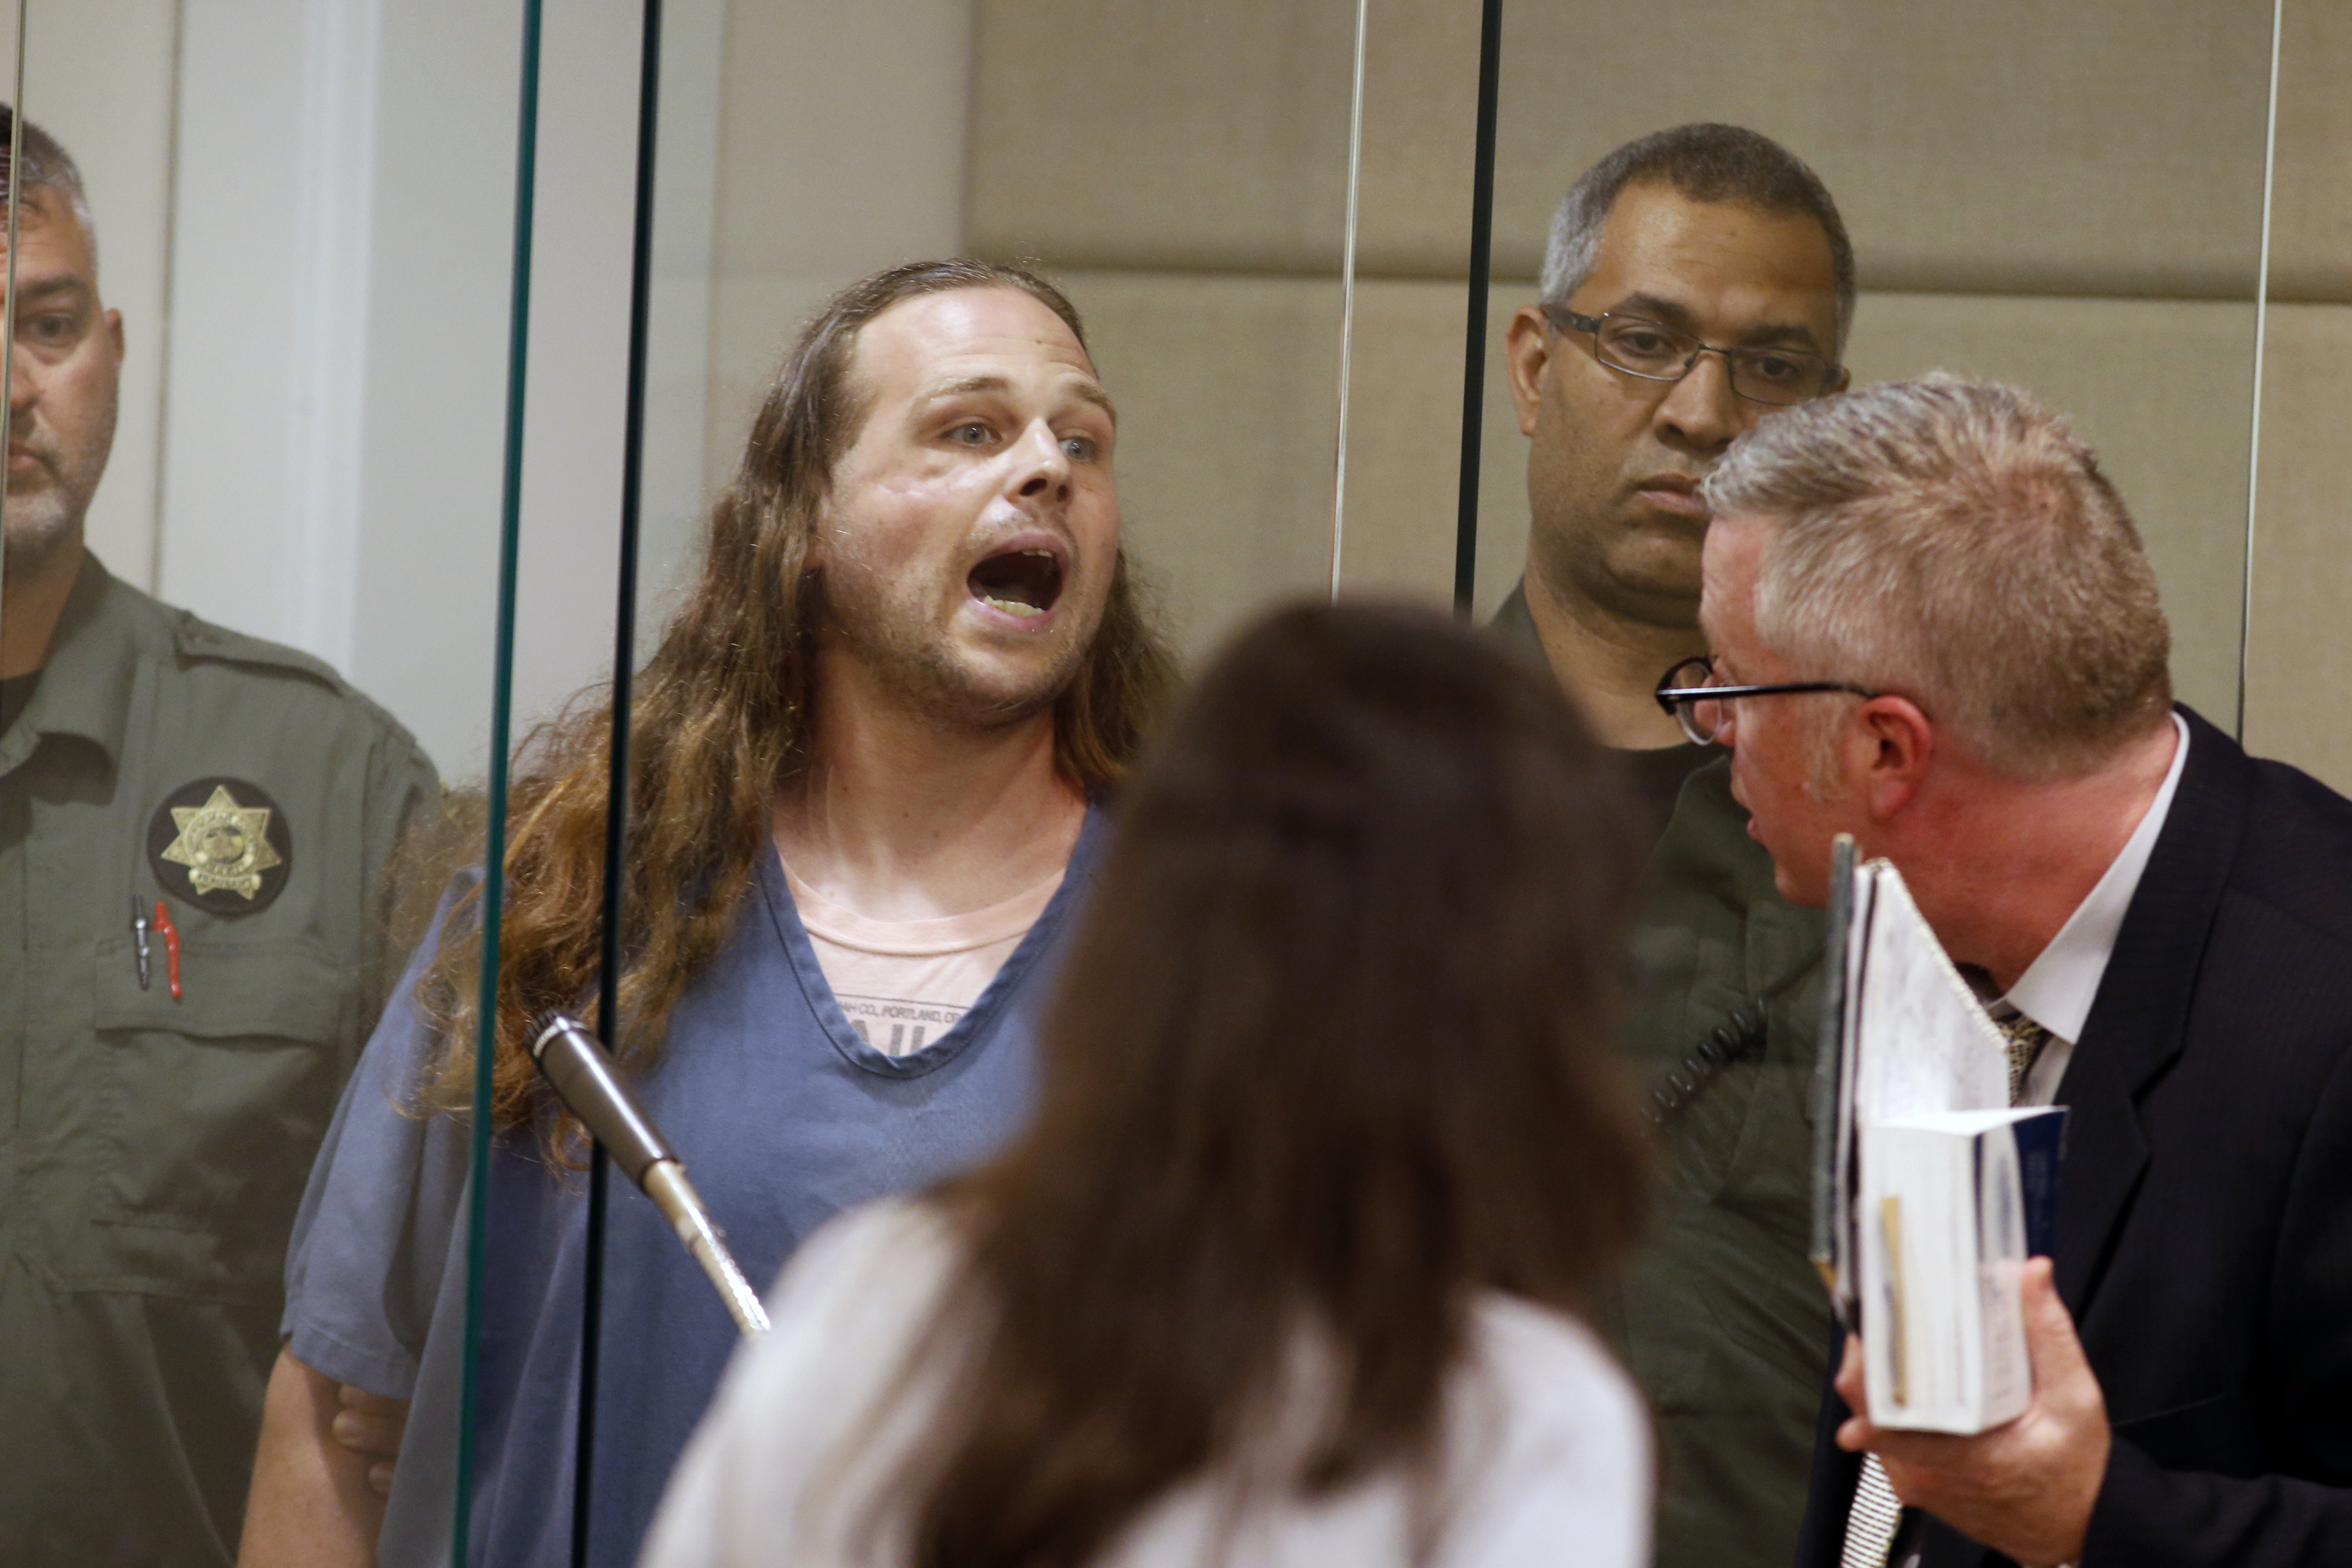 Jeremy Joseph Christian shouts as he is arraigned in Multnomah County Circuit Court in Portland, Ore., Tuesday, May 30, 2017. Authorities say Christian started verbally abusing two young women, including one wearing a hijab. When three men on the train intervened, police say, Christian attacked them, killing two and wounding one. (Beth Nakamura&mdash;AP)